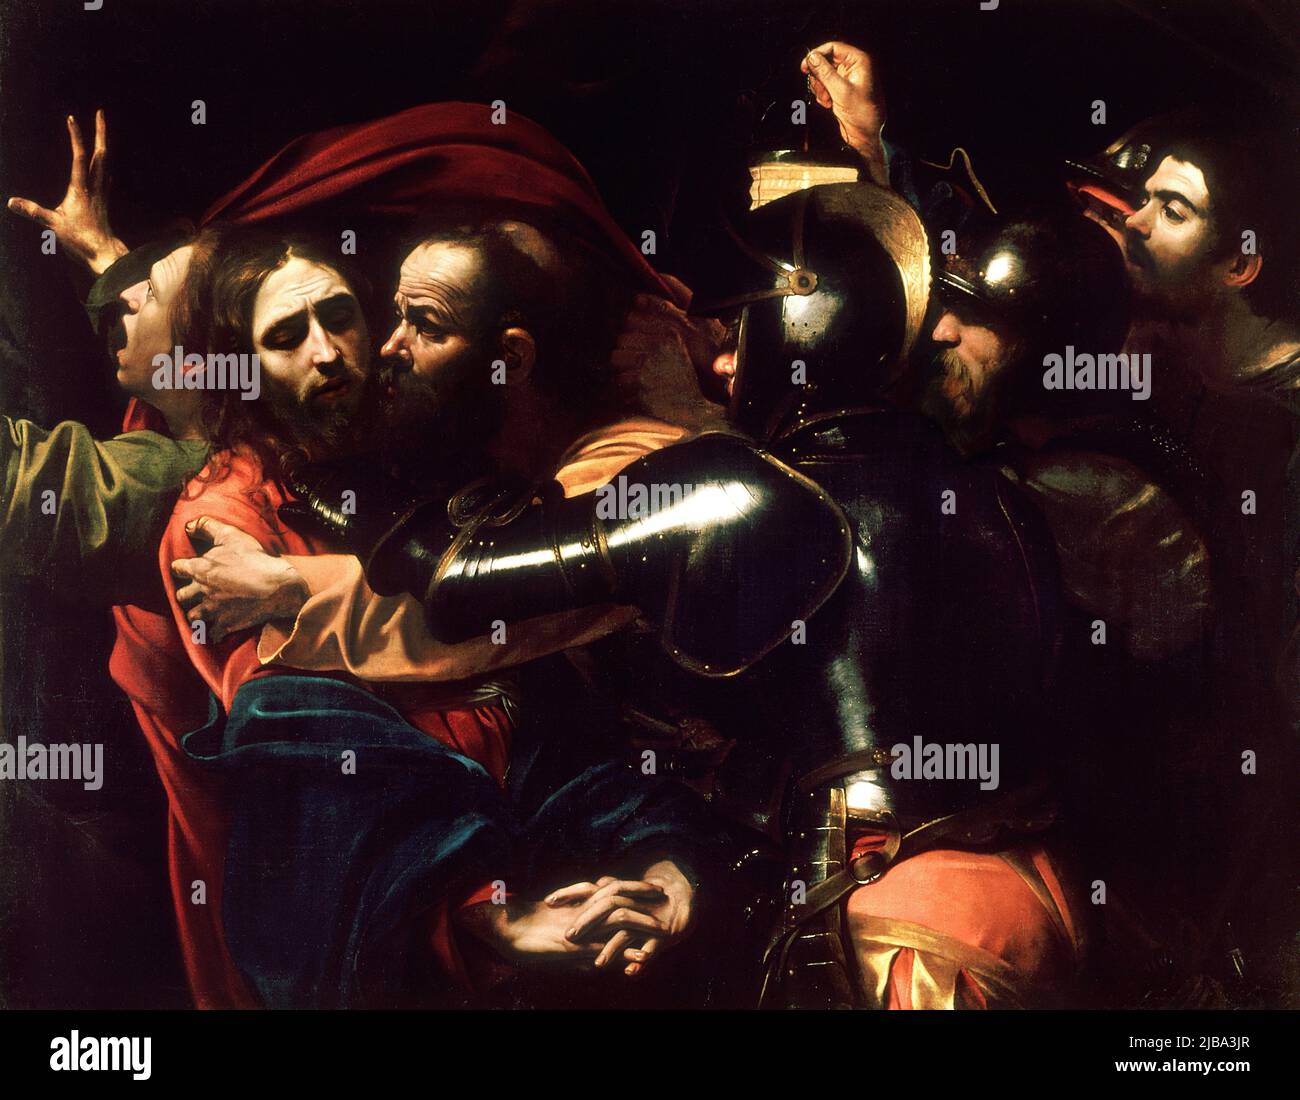 The Taking of Christ by Caravaggio (1571-1610) Stock Photo